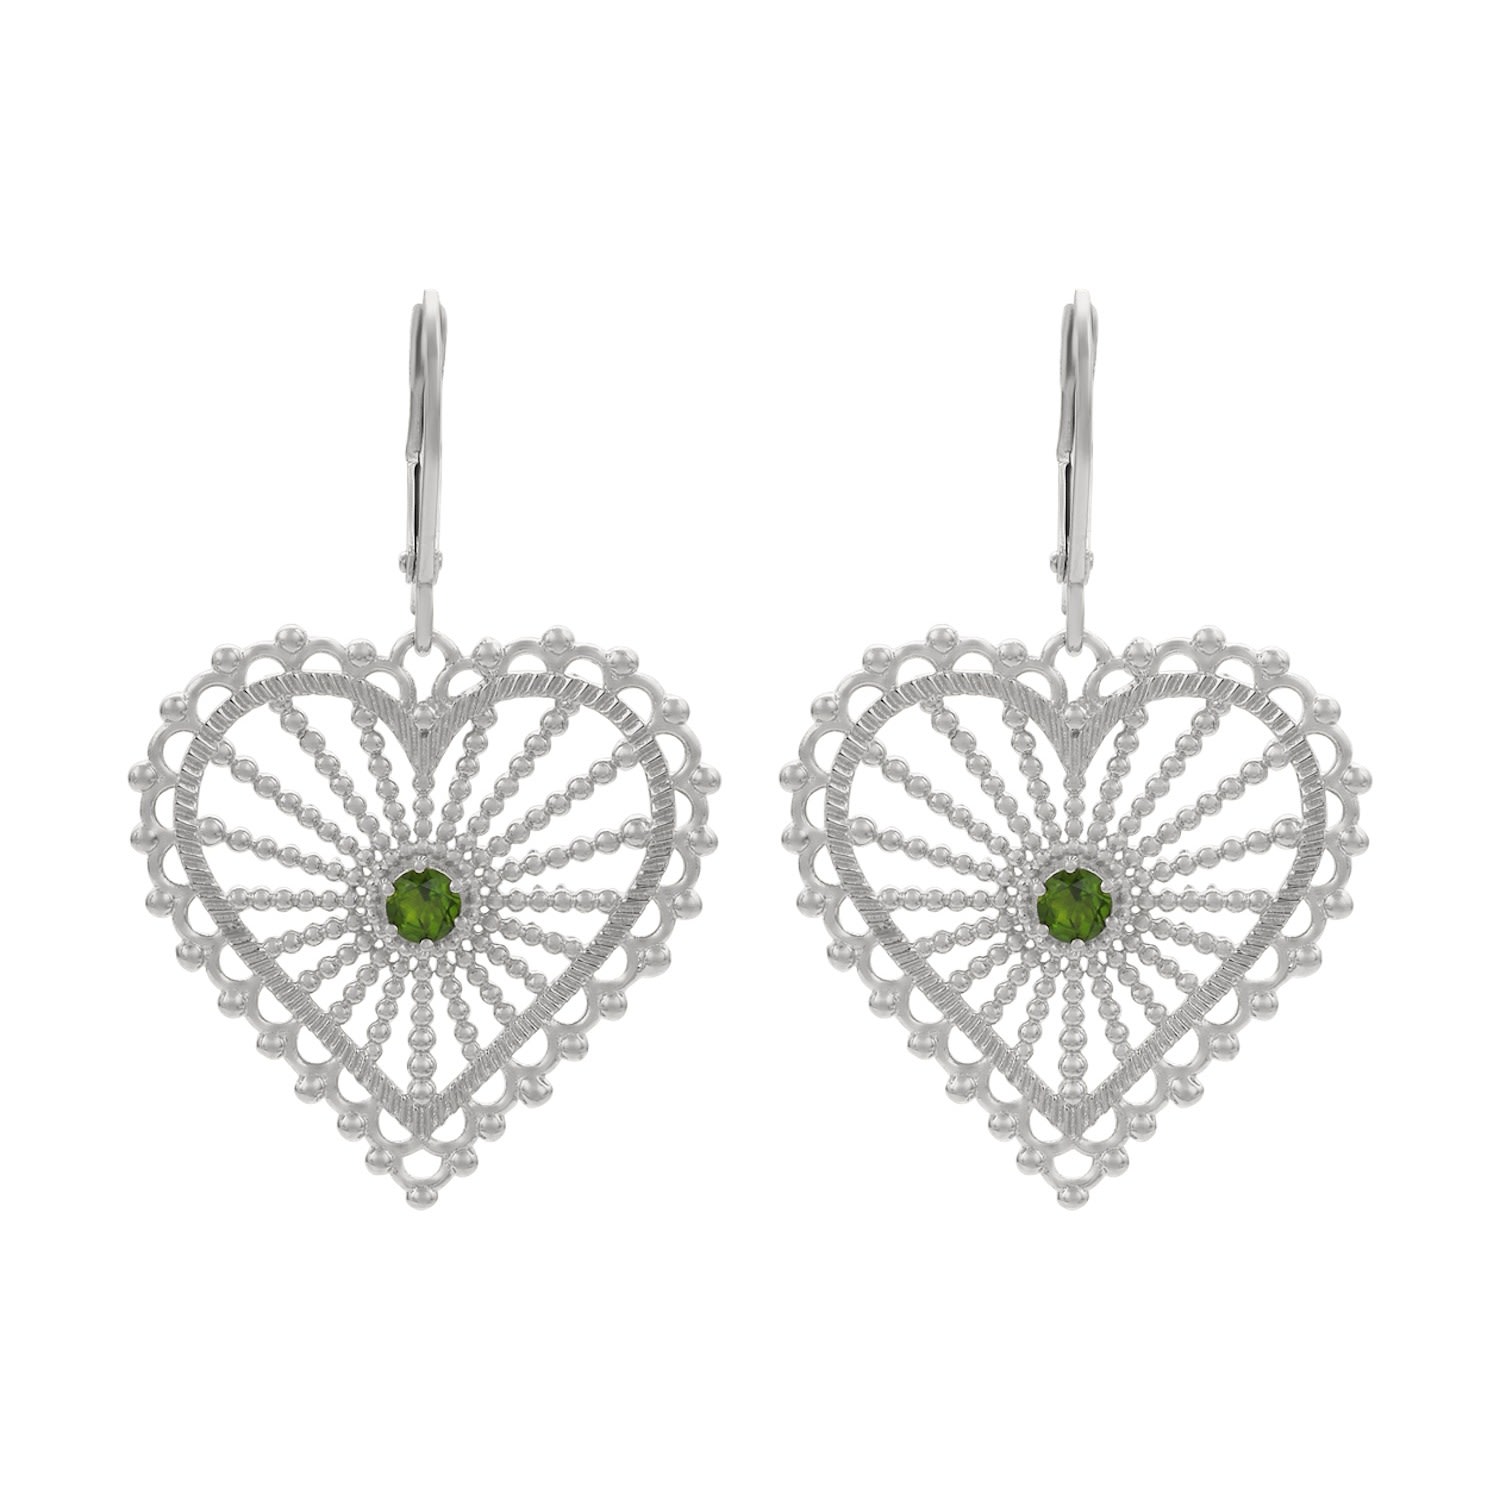 Zoe And Morgan Women's Amor Earrings Silver Chrome Diopside In White